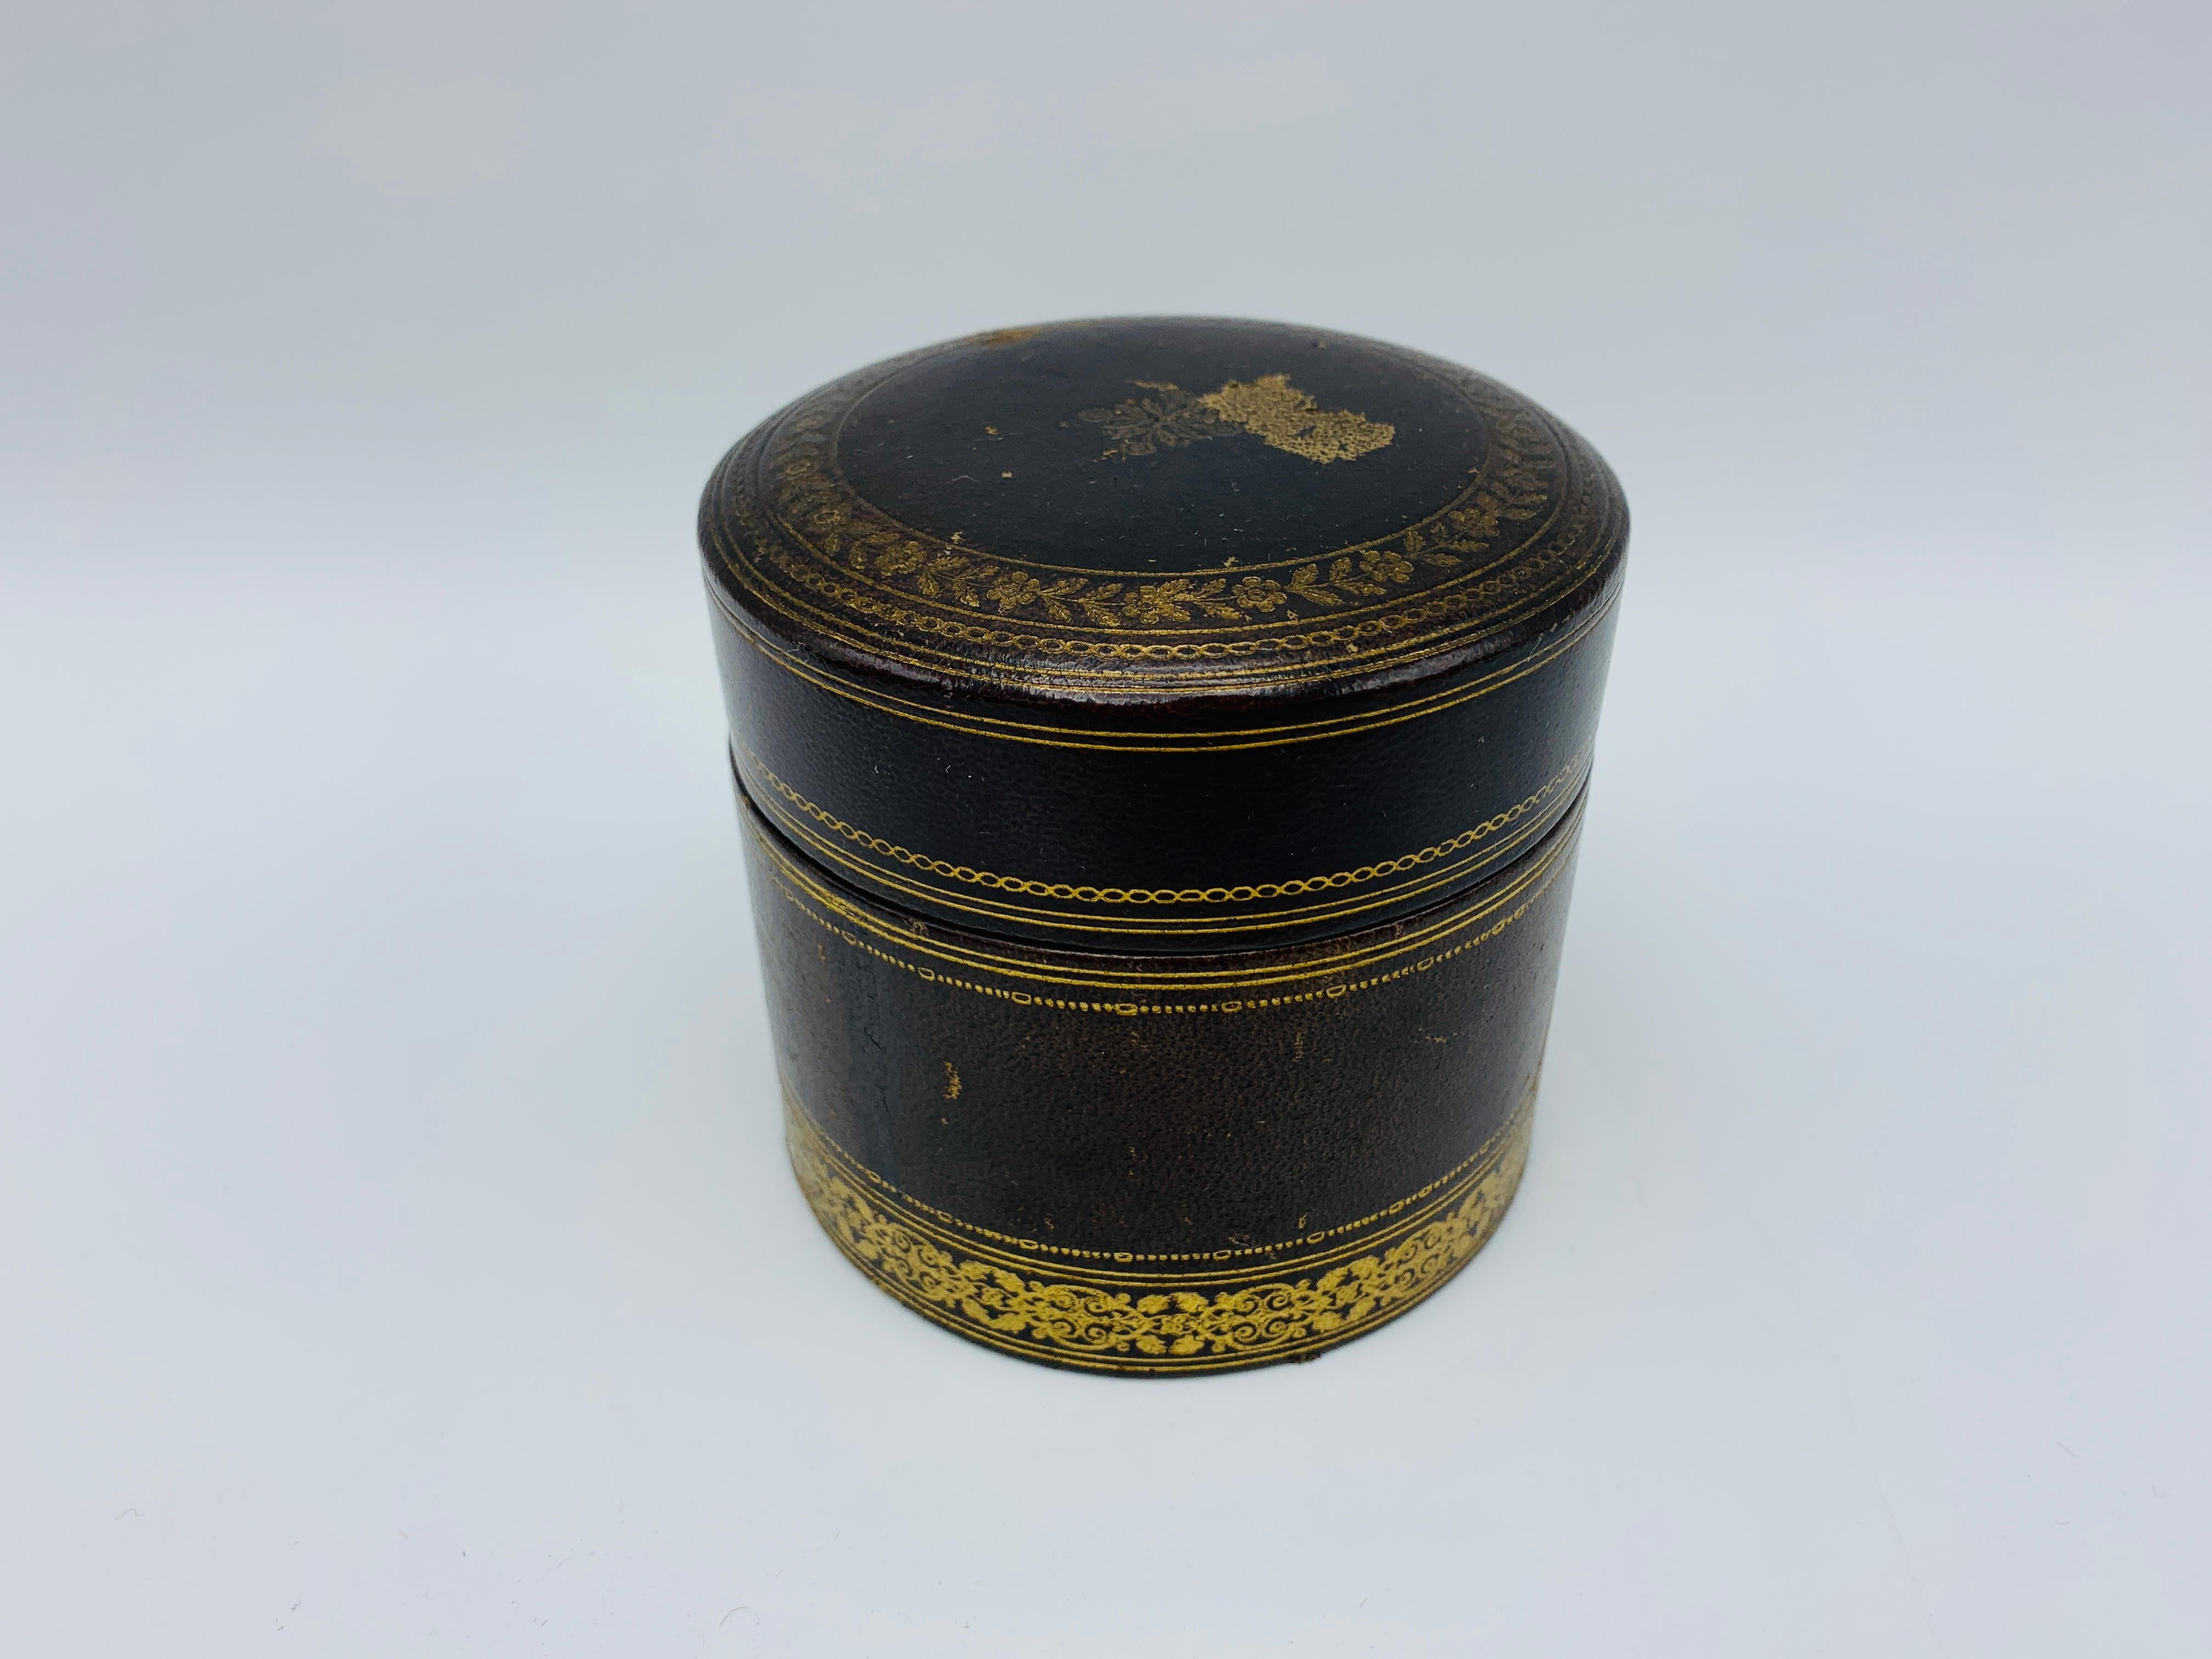 Listed is a beautiful, 1960s Italian leather lidded box. The piece has a deep brown leather exterior, with a gold filigree design. The interior is a deep purple, with a removable divider - perfect in a dining setting to hold toothpicks. Marked 'Made